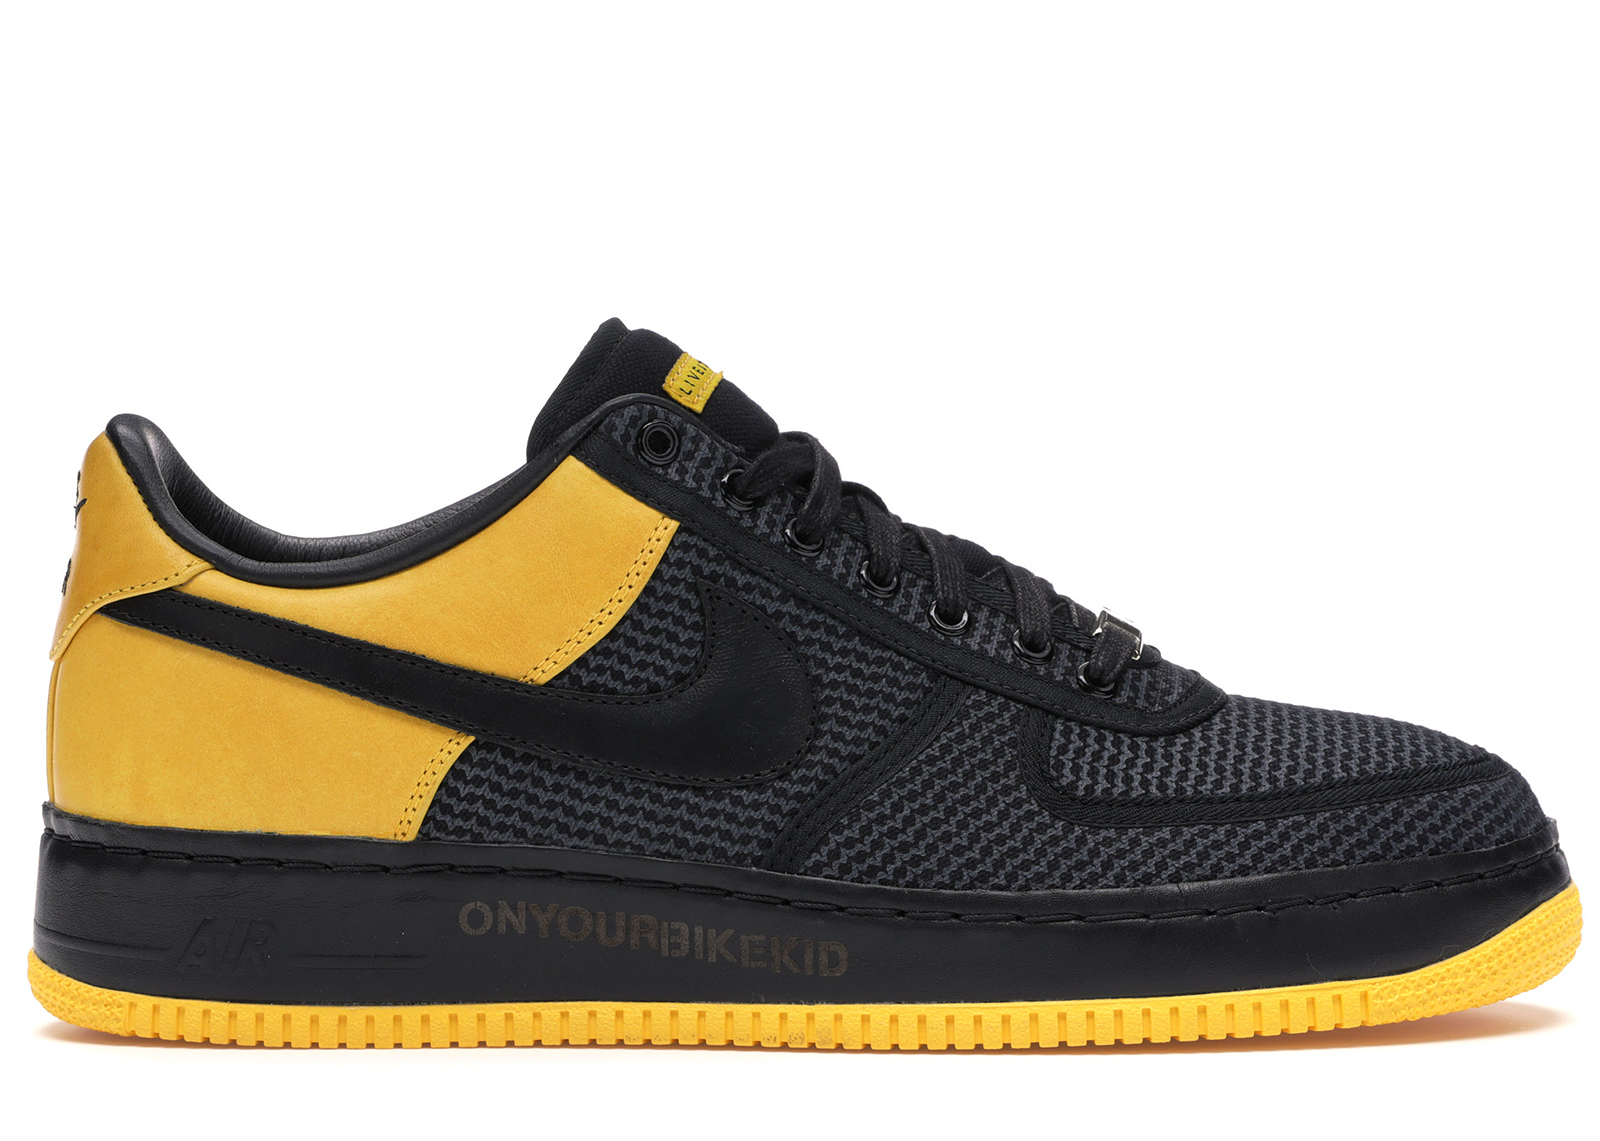 Nike Air Force 1 Low Undefeated Livestrong Men's - 318985 700 - US